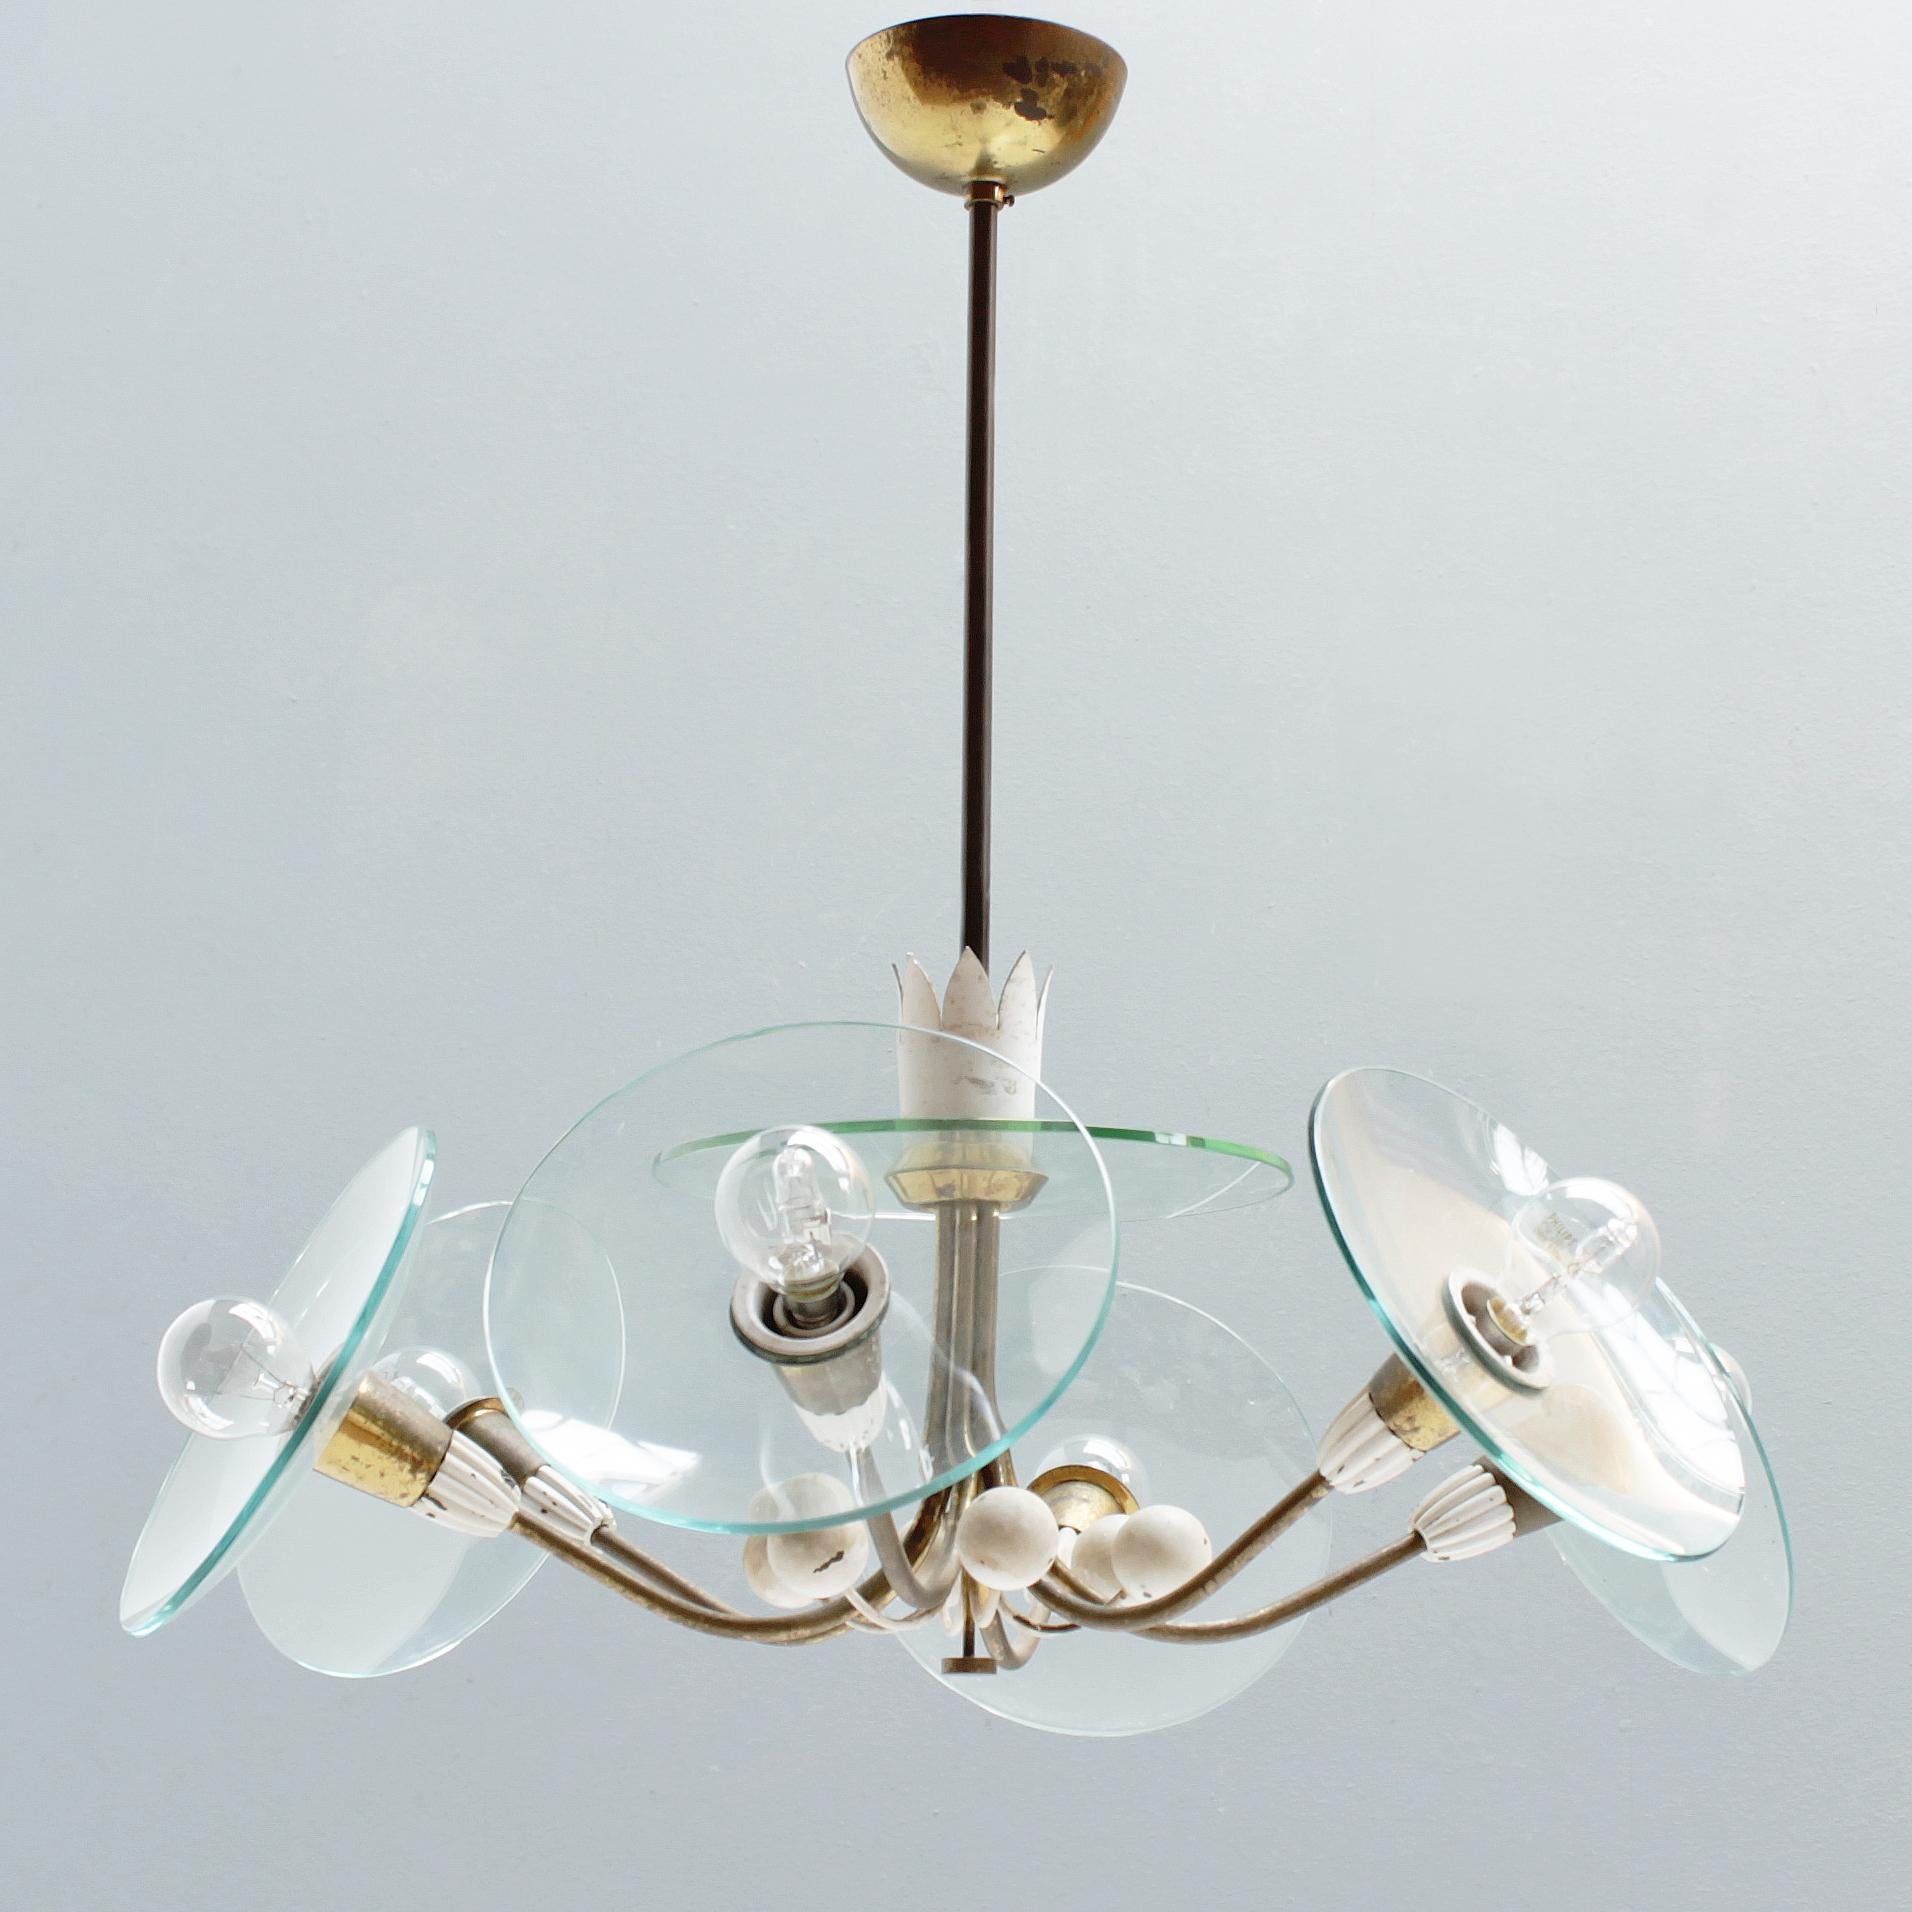 Elegant 6-lights chandelier attributed to Pietro Chiesa for Fontana Arte, Italy. Period 1940-1949. Rewired but in an original condition with a beautiful patina. Brass, partially painted white and crystal discs.
Six small bulbs, Edison Screw (SES),